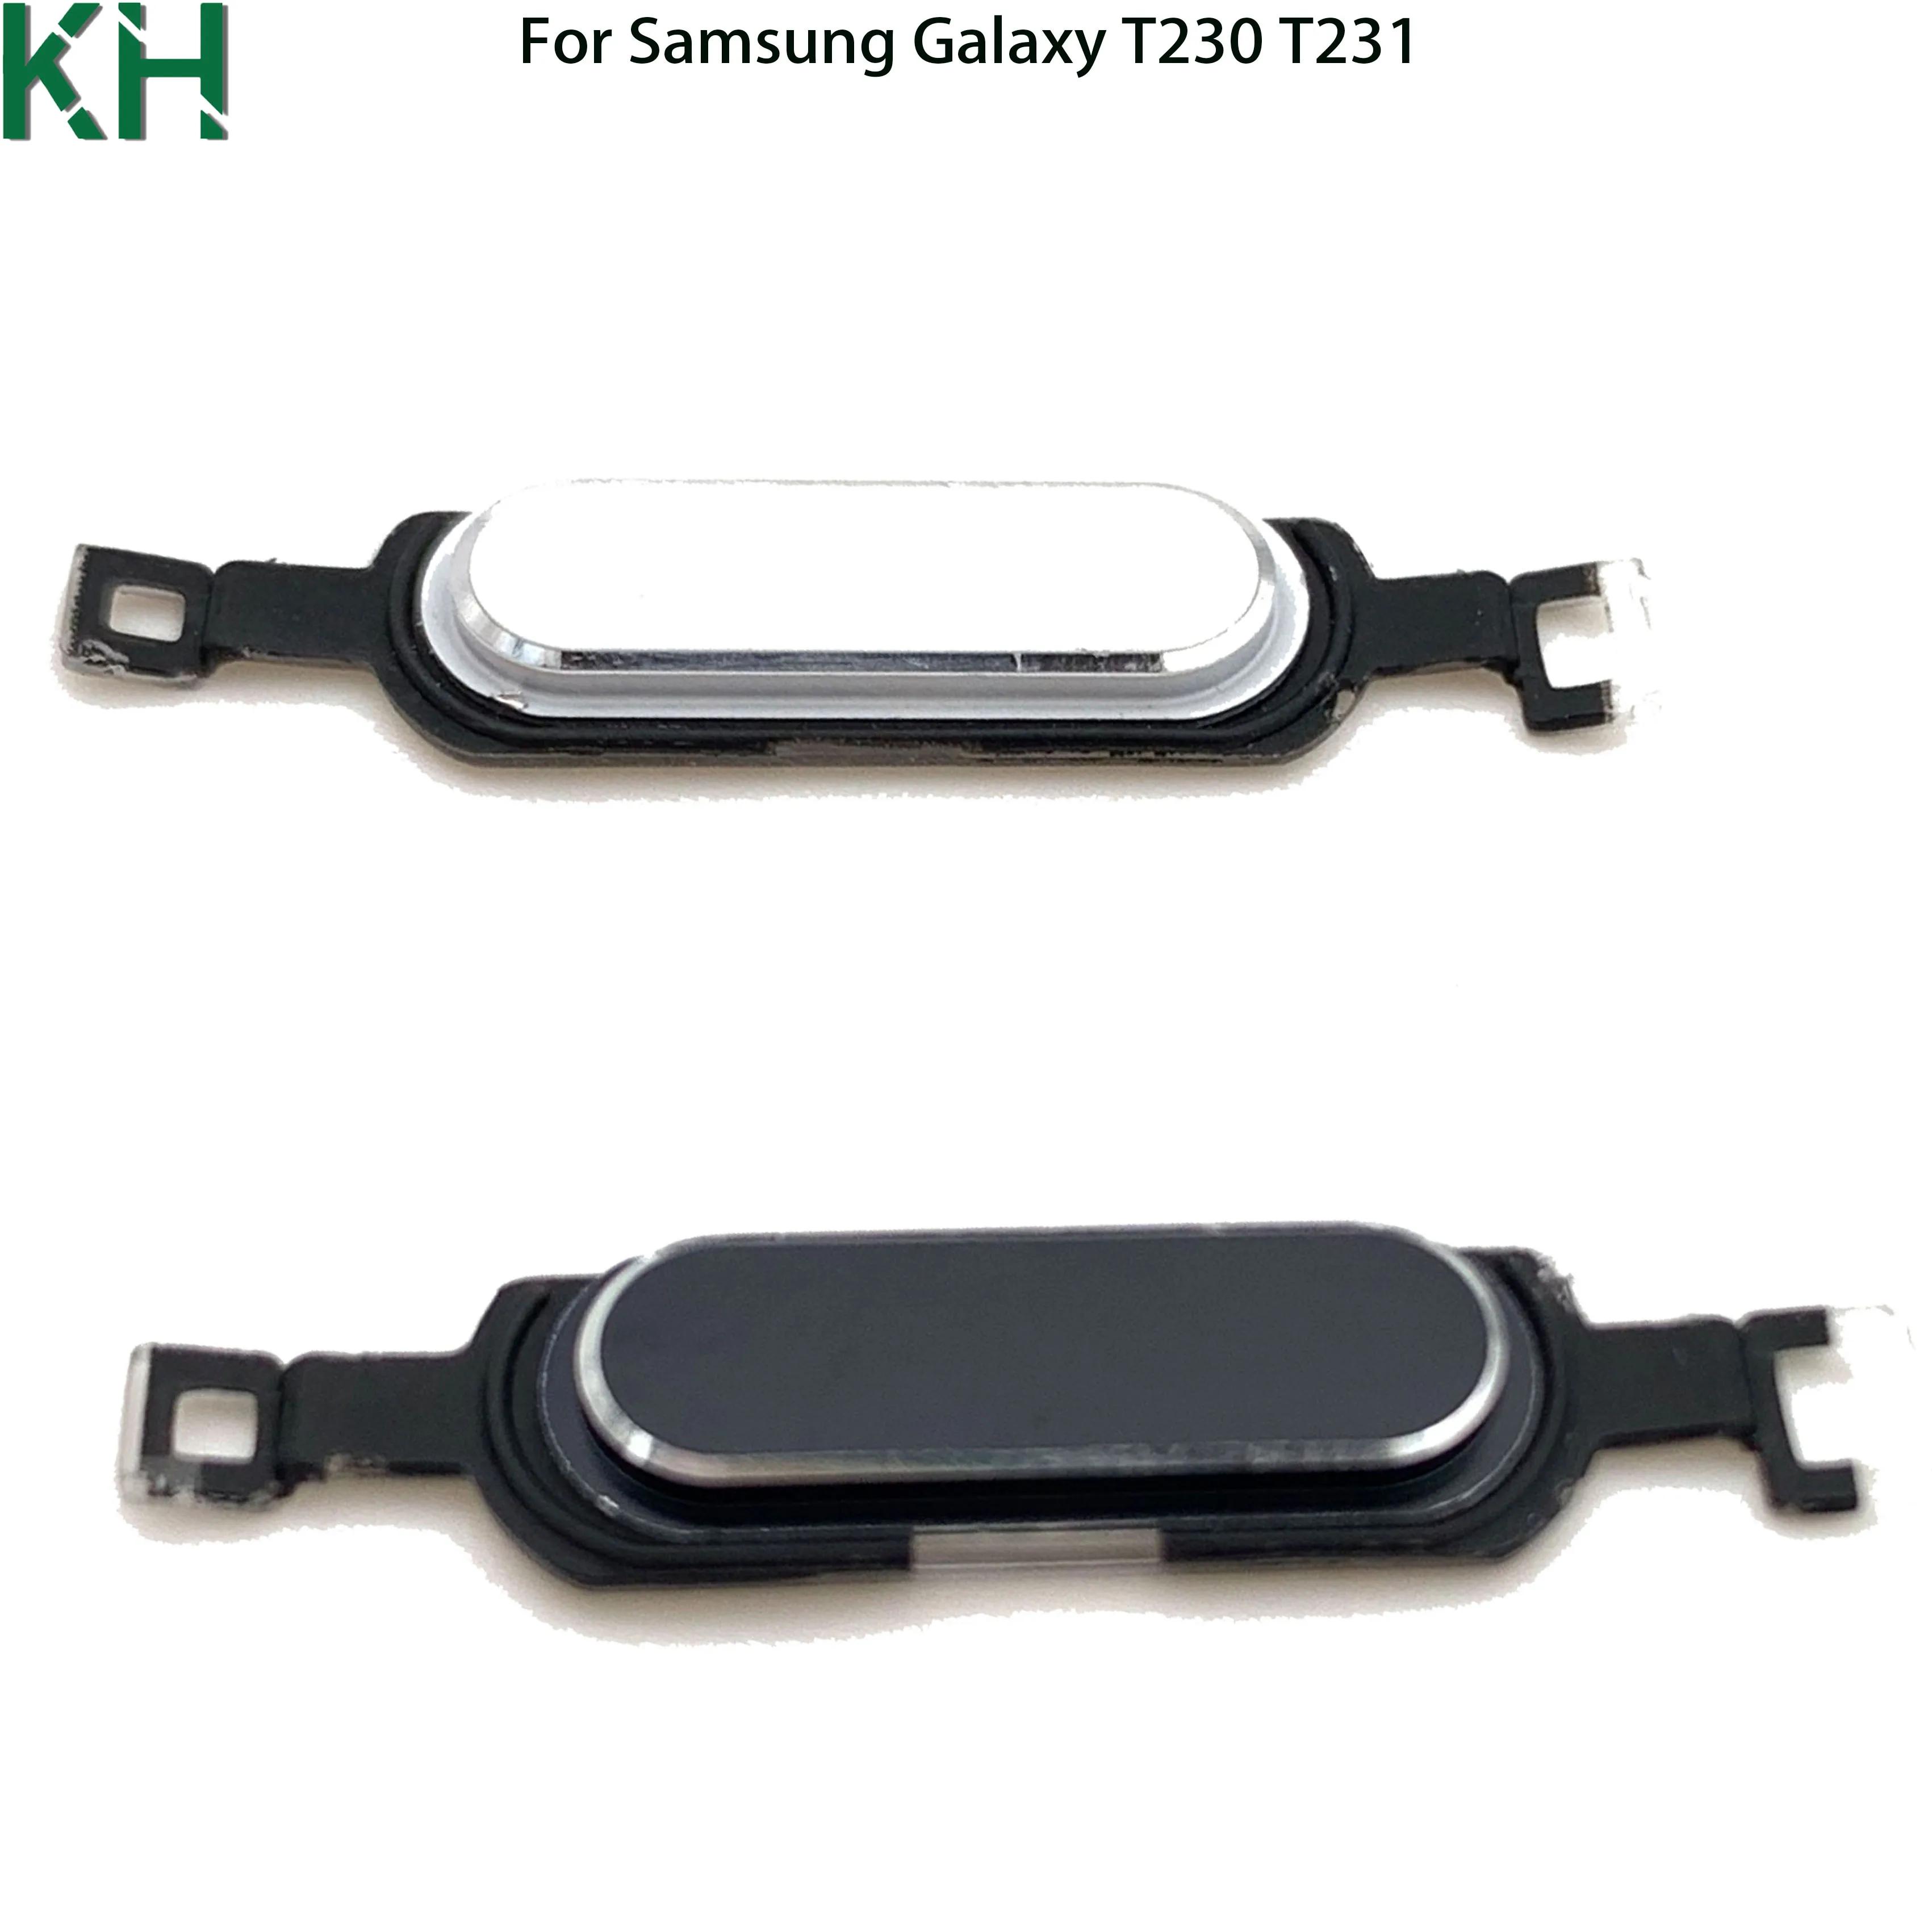 10PCS Home Button Replacement For Samsung Galaxy T230 T231 T235 Home Key Repairing